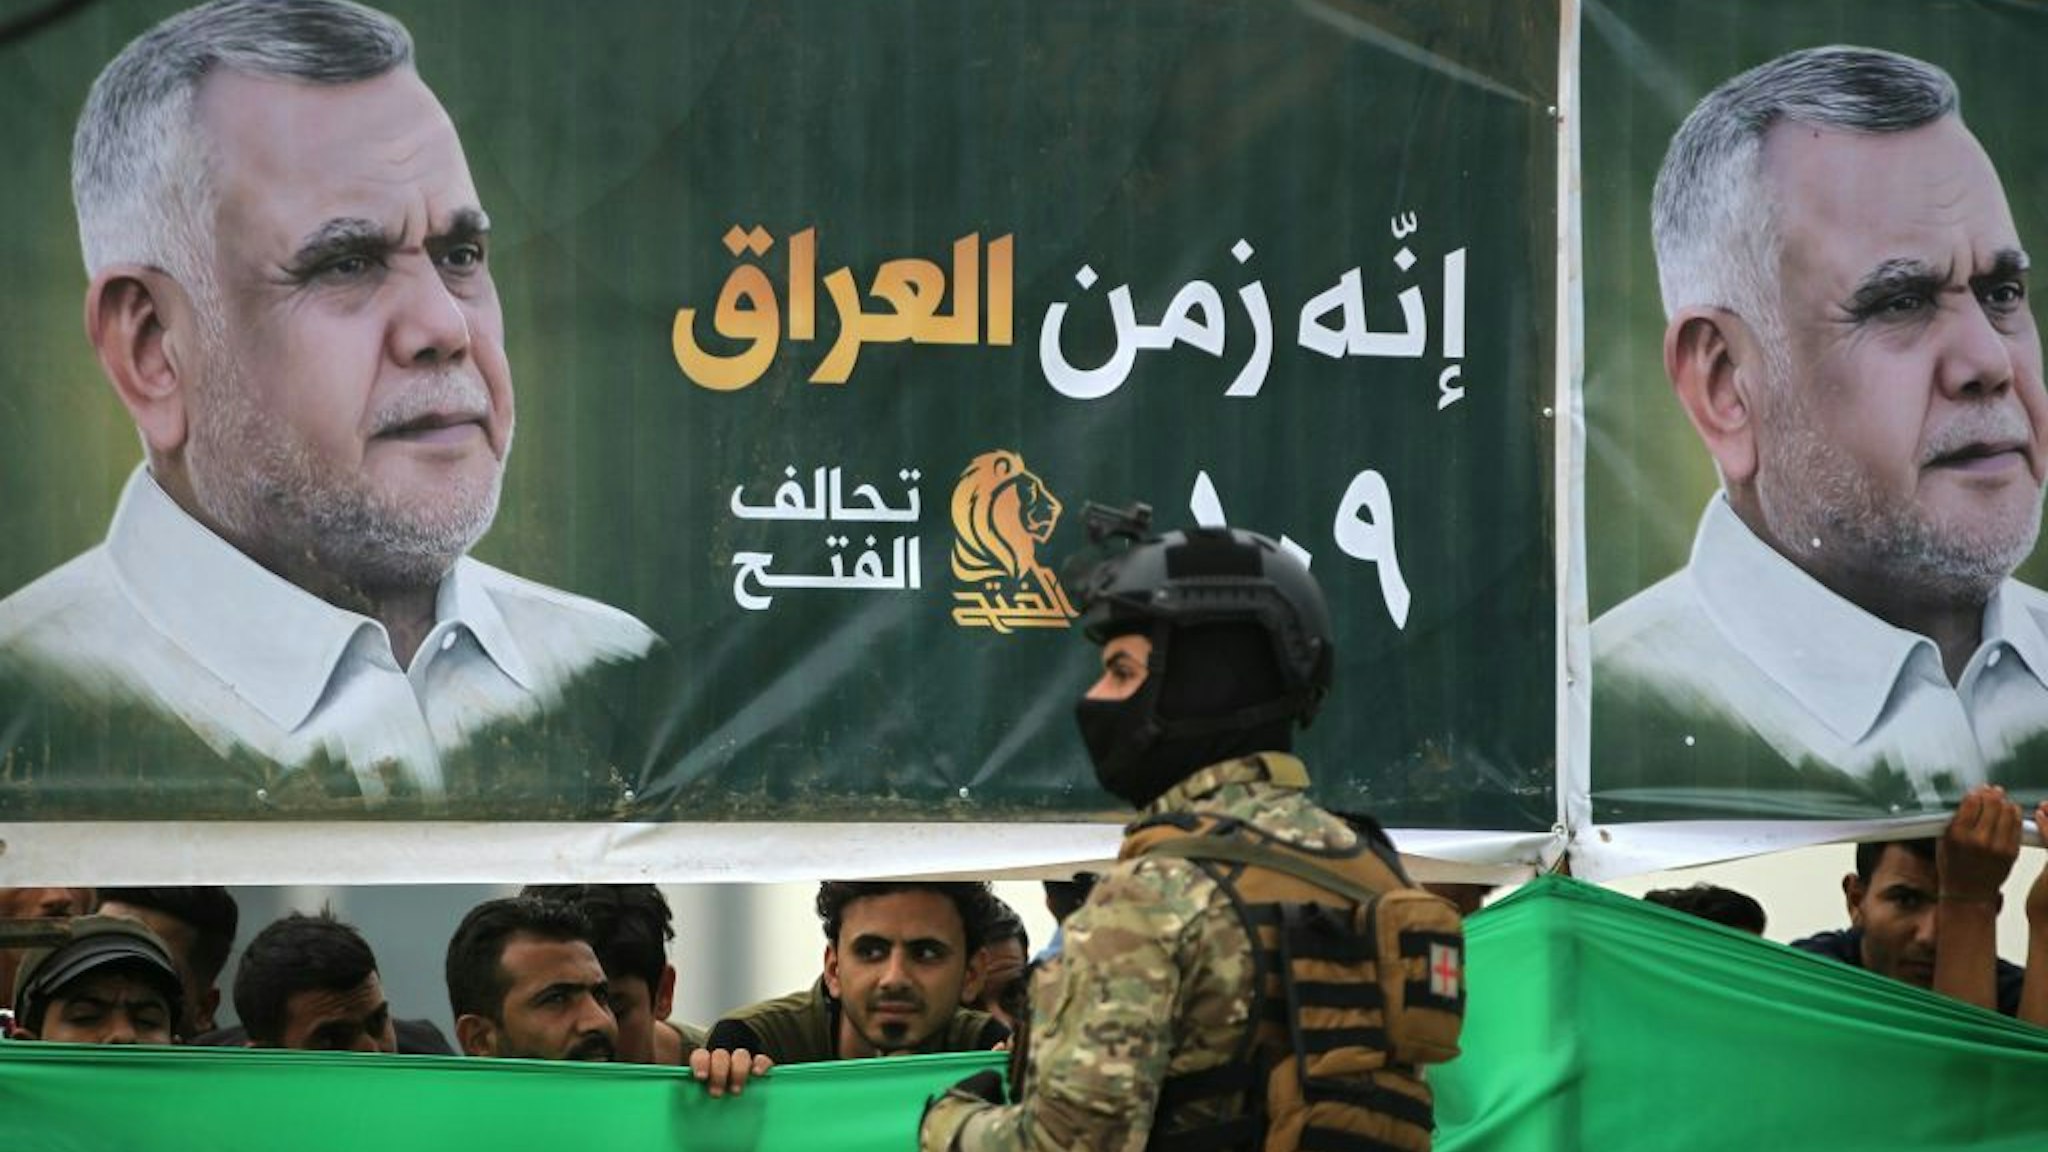 Iraqi supporters of the Fateh Alliance, a coalition of Iranian-supported militia groups, listen to a speech by Hadi Amiri (portrait), head of the Iranian-backed Badr Organization and leader of the Fateh Alliance, during a campaign rally in Baghdad on May 7, 2018, ahead of Iraq's parliamentary elections to be held on May 12. (Photo by AHMAD AL-RUBAYE / AFP) (Photo credit should read AHMAD AL-RUBAYE/AFP via Getty Images)